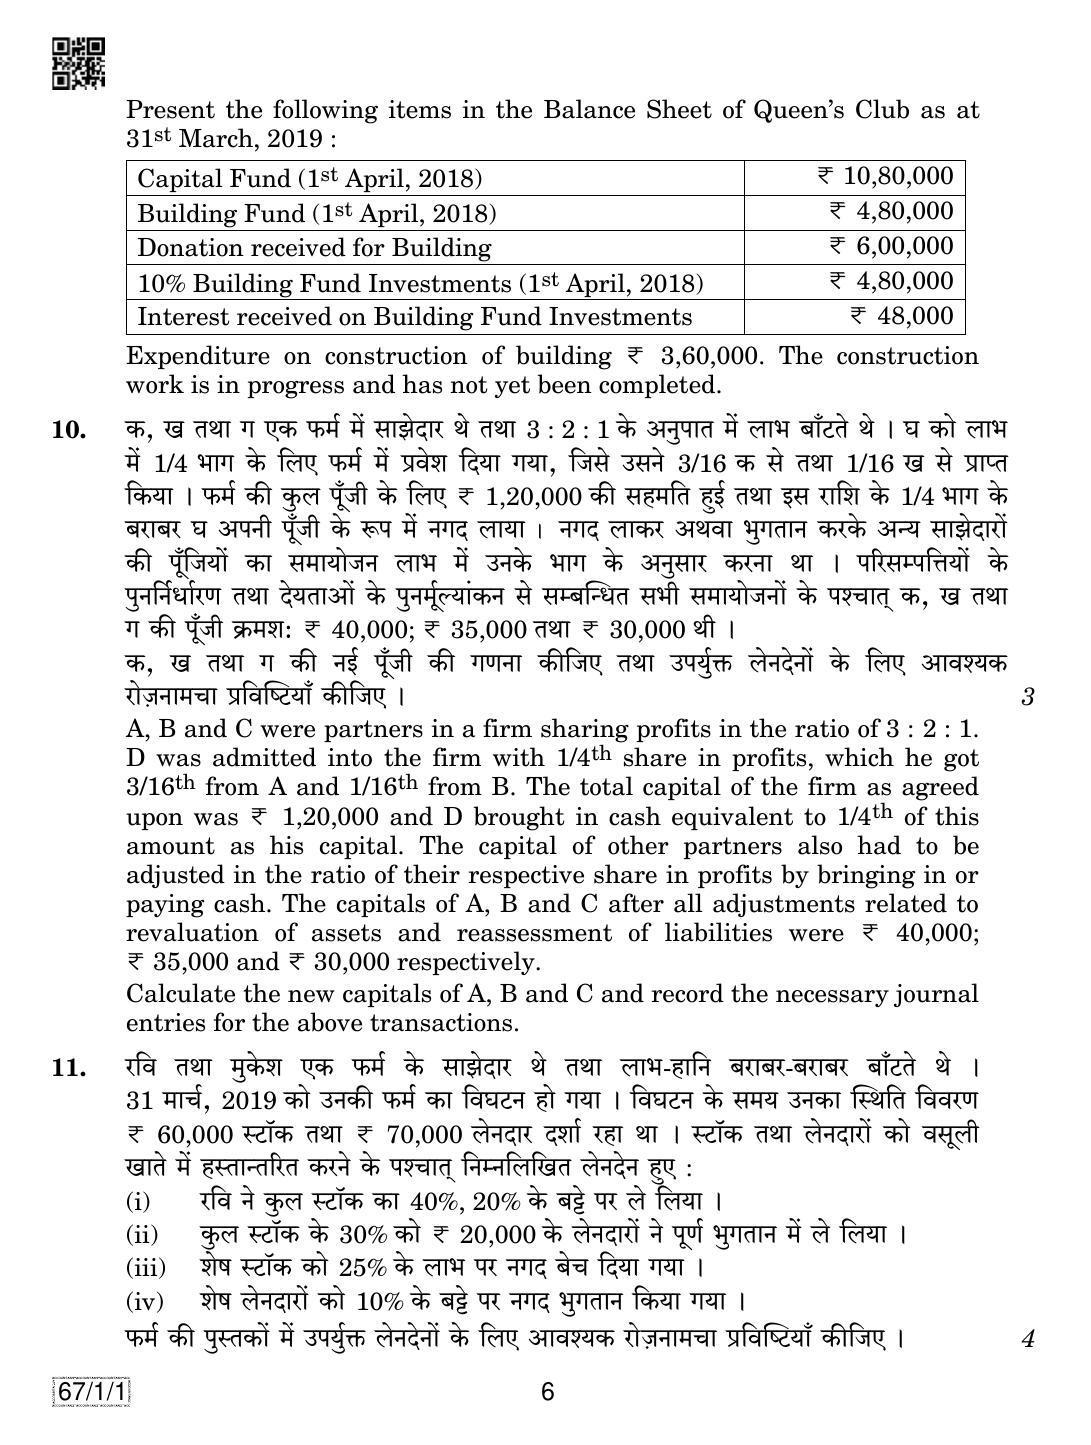 CBSE Class 12 67-1-1 ACCOUNTANCY 2019 Compartment Question Paper - Page 6